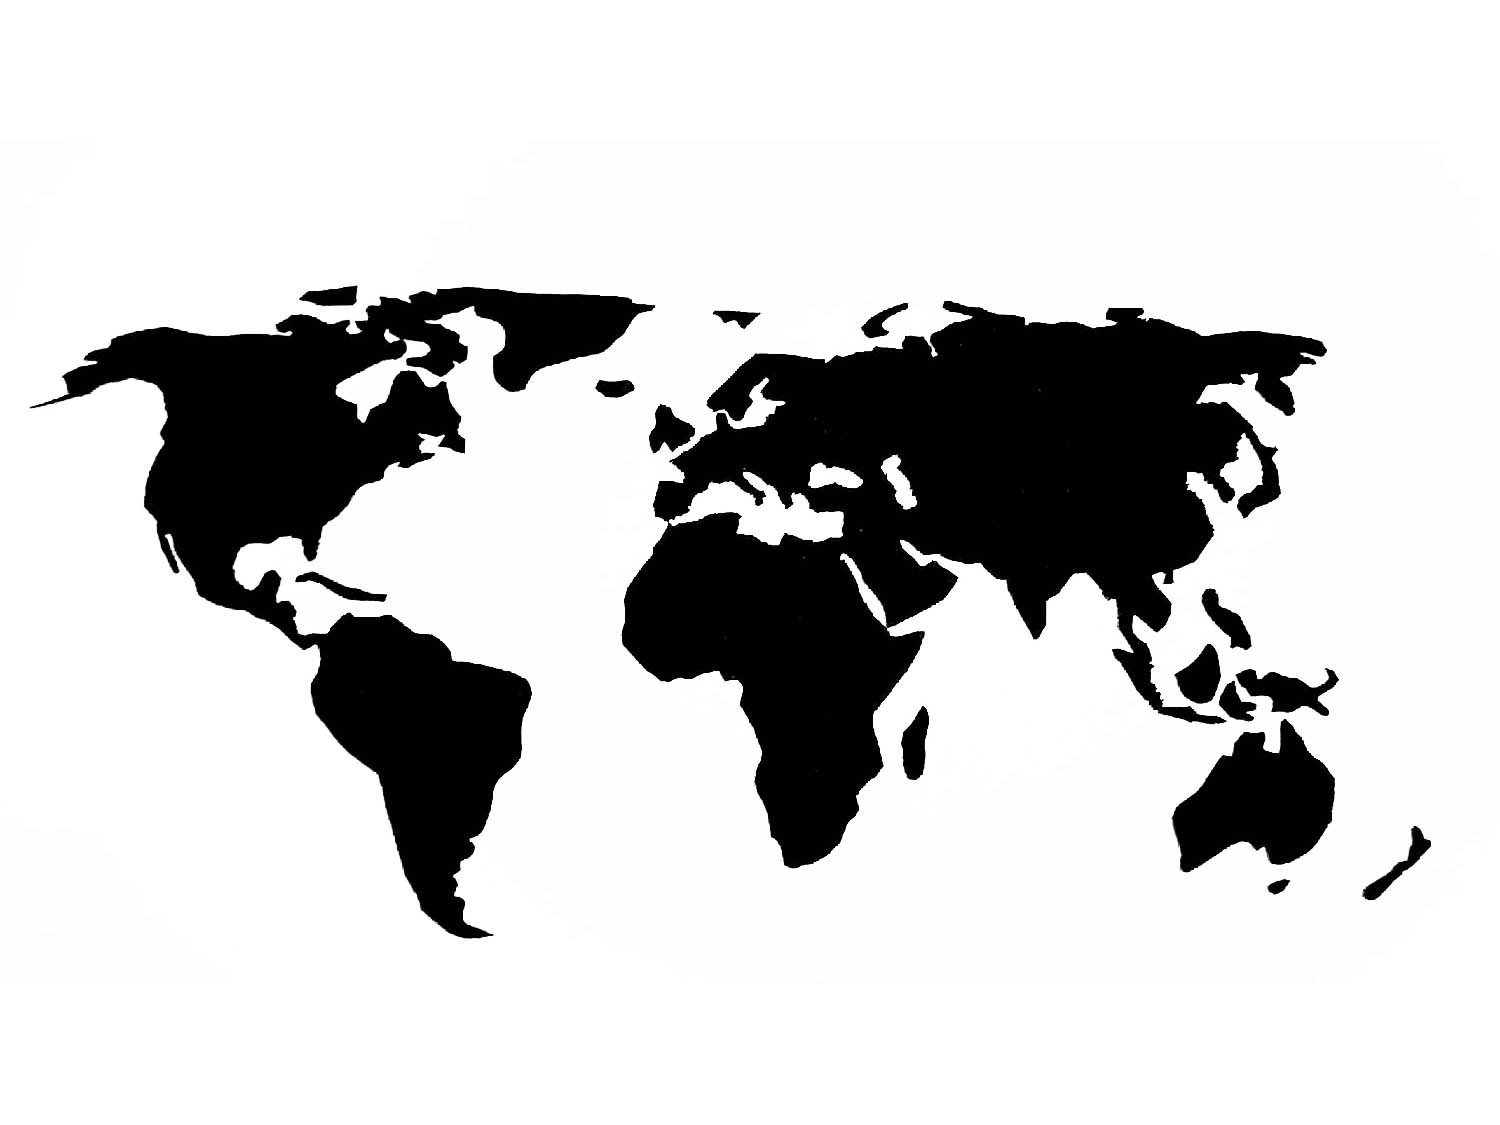 World Map stencils - Free stencils and template cutout printable